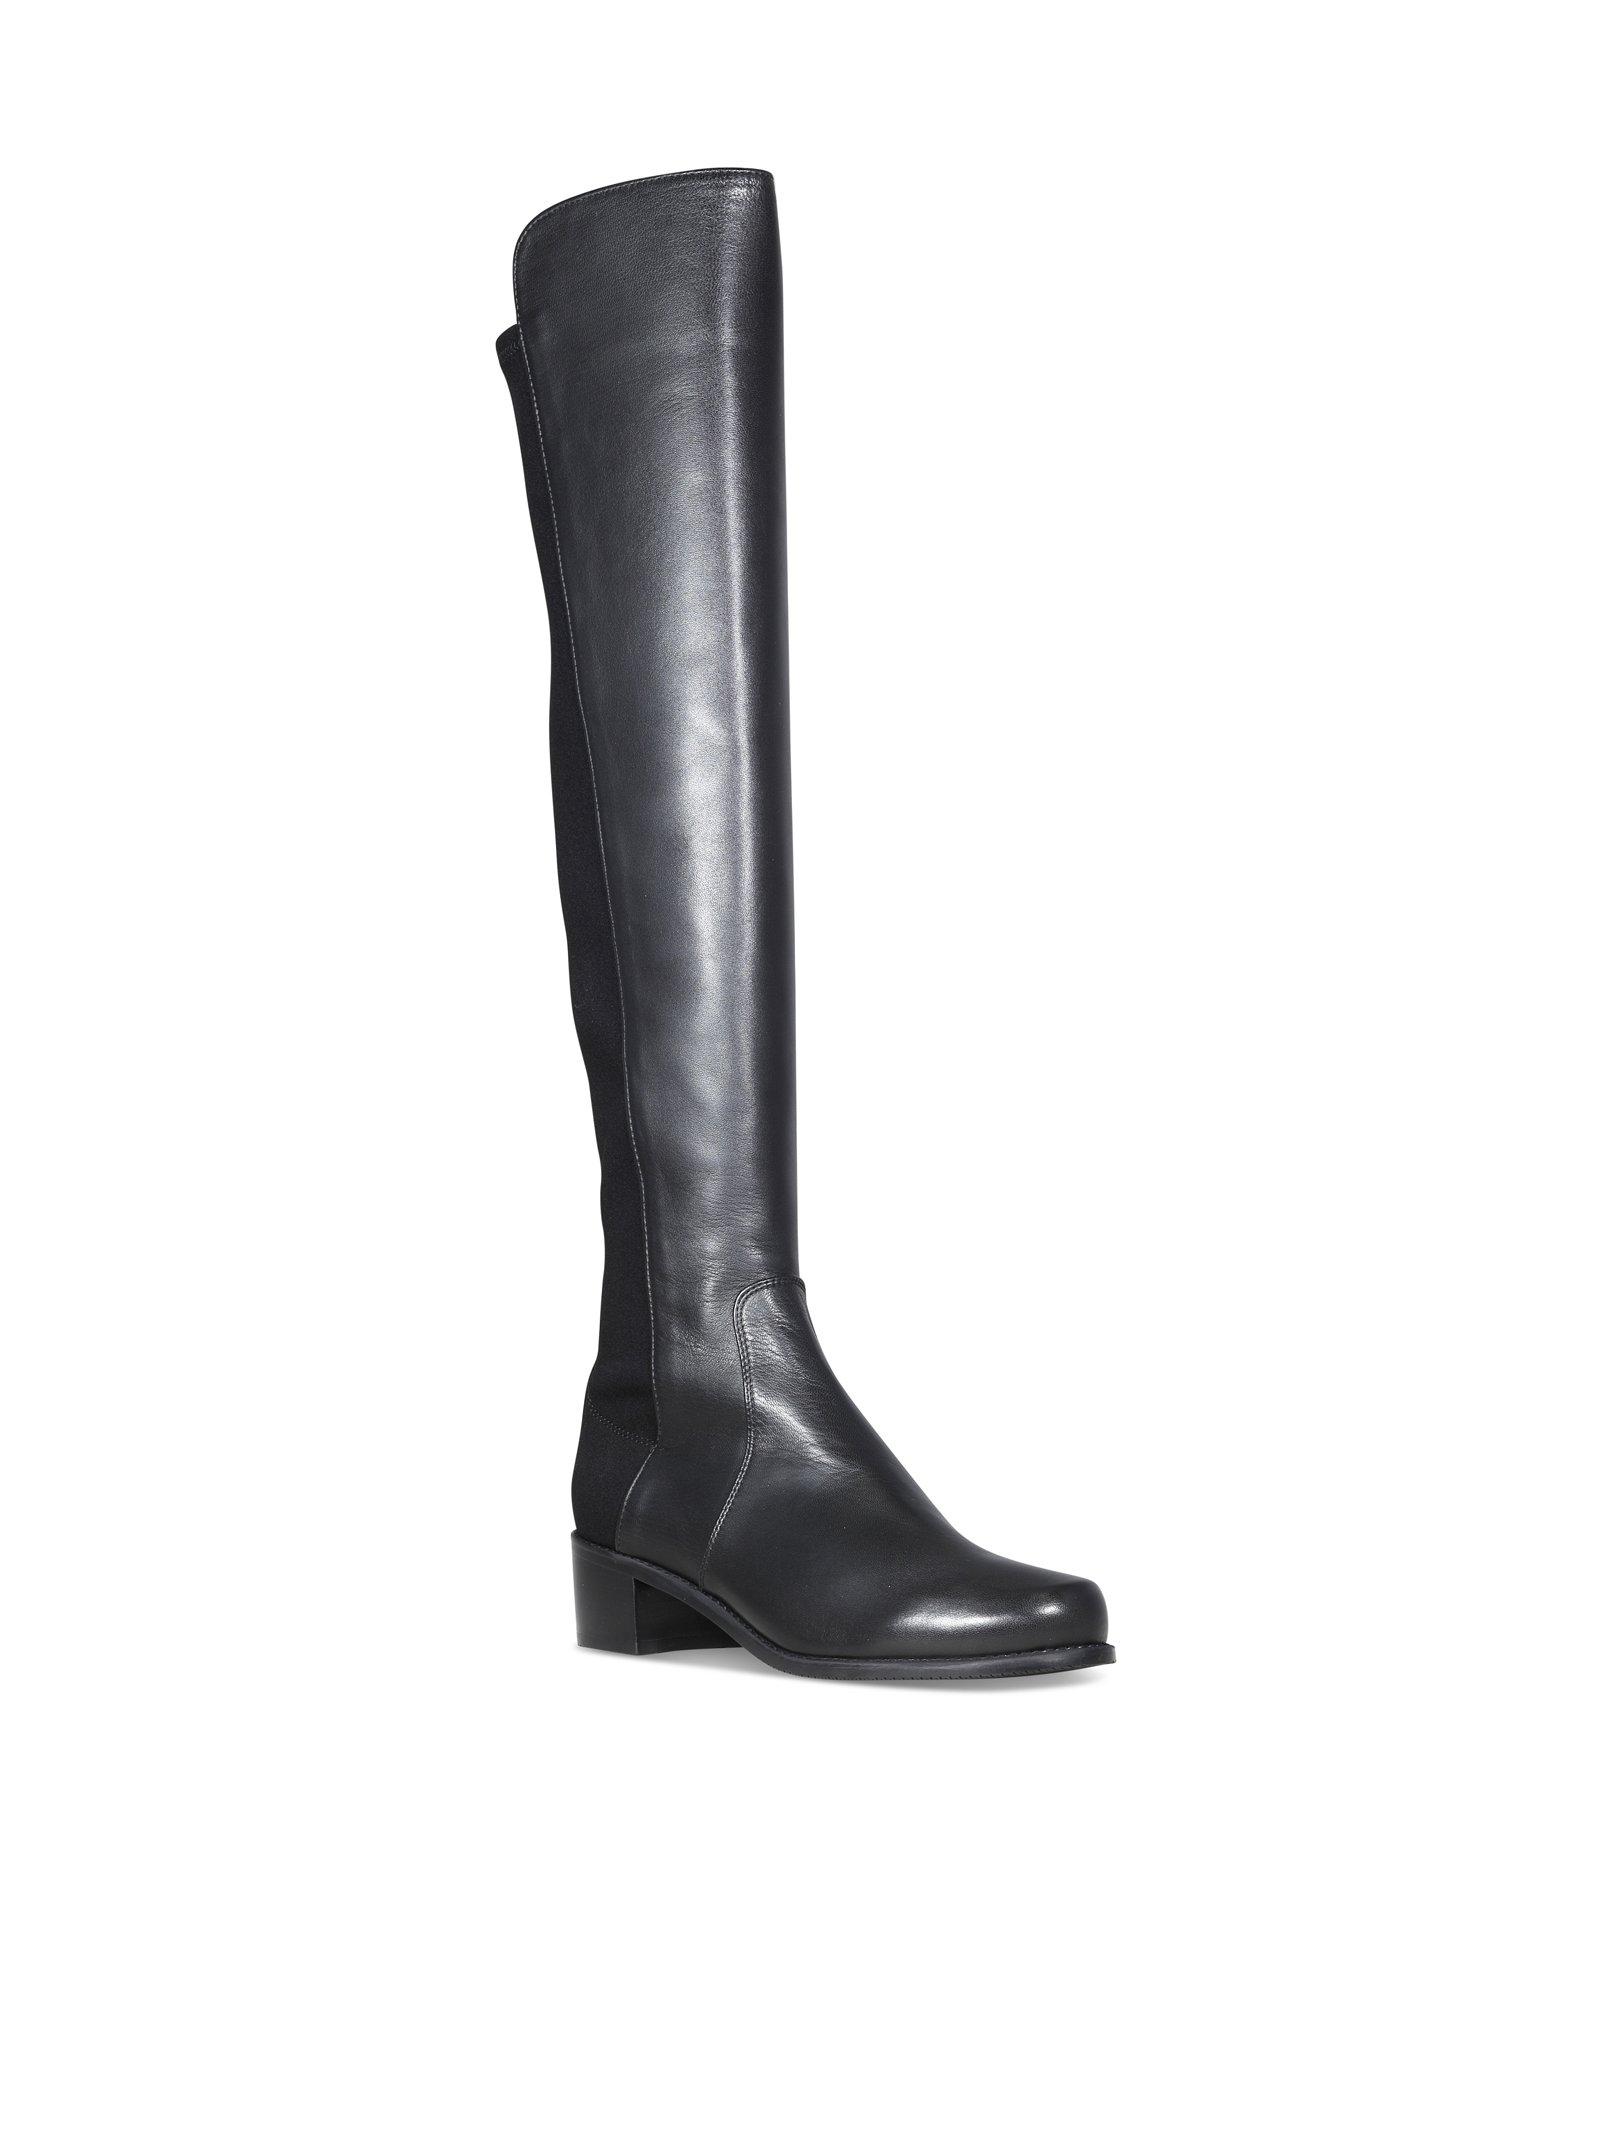 Stuart Weitzman Leather Reserve Boots in Black - Lyst